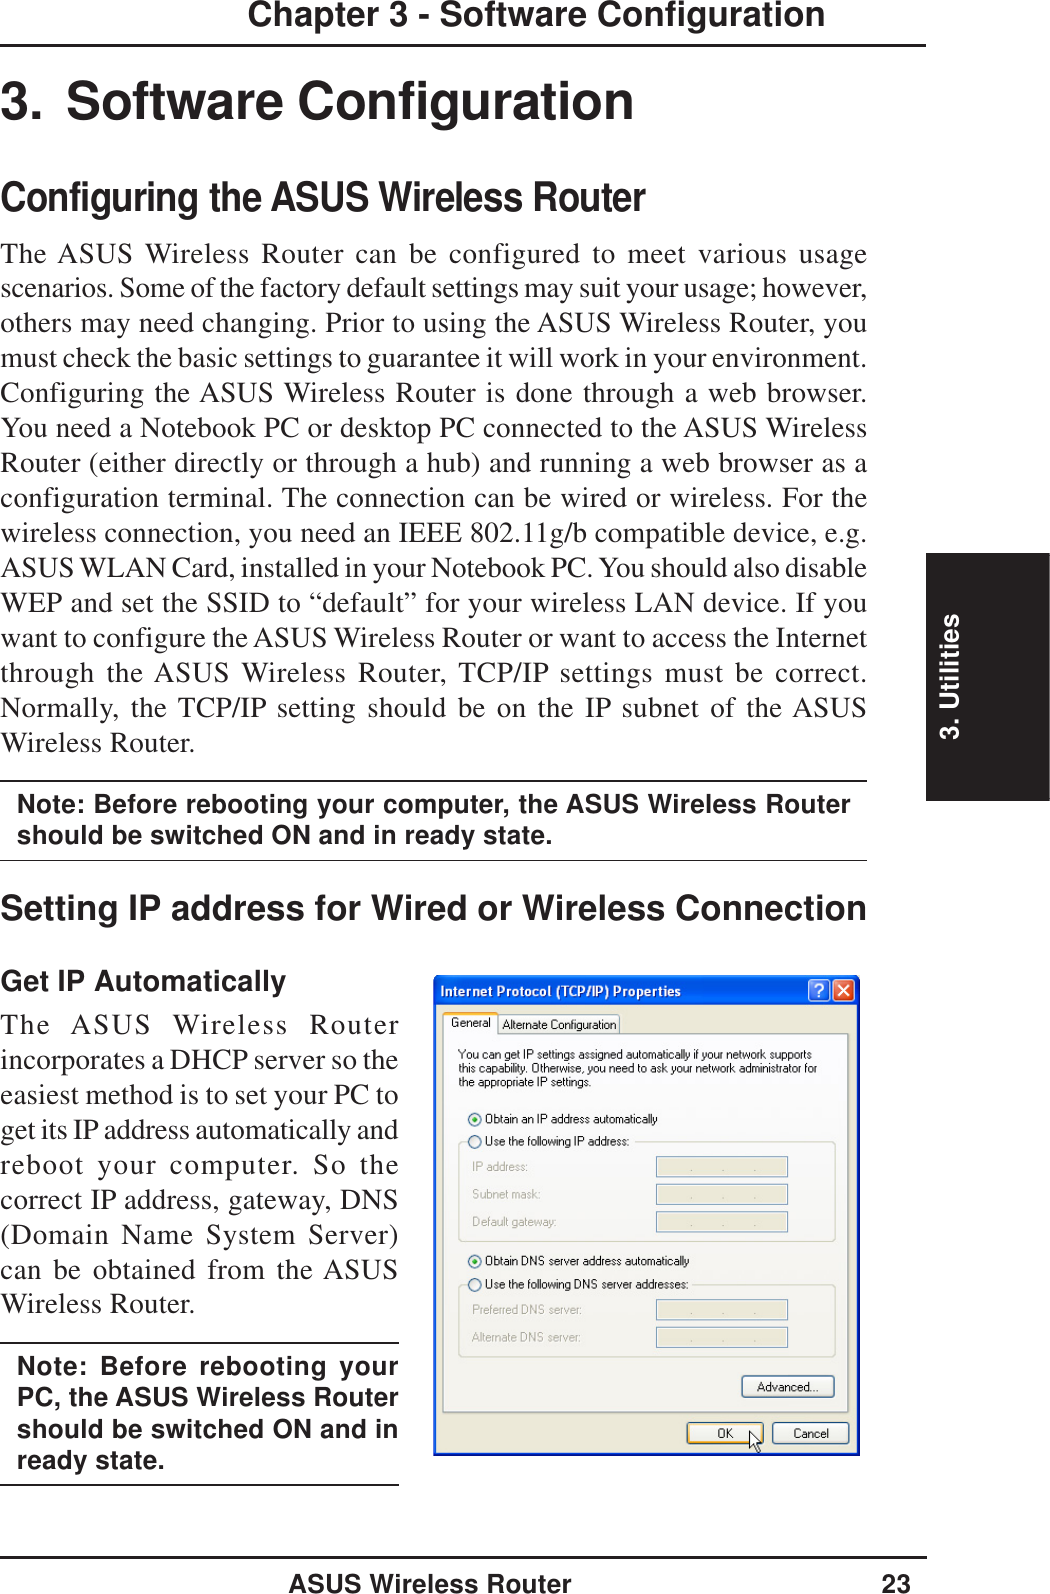 3. UtilitiesASUS Wireless Router 23Chapter 3 - Software Configuration3. Software ConfigurationConfiguring the ASUS Wireless RouterThe ASUS Wireless Router can be configured to meet various usagescenarios. Some of the factory default settings may suit your usage; however,others may need changing. Prior to using the ASUS Wireless Router, youmust check the basic settings to guarantee it will work in your environment.Configuring the ASUS Wireless Router is done through a web browser.You need a Notebook PC or desktop PC connected to the ASUS WirelessRouter (either directly or through a hub) and running a web browser as aconfiguration terminal. The connection can be wired or wireless. For thewireless connection, you need an IEEE 802.11g/b compatible device, e.g.ASUS WLAN Card, installed in your Notebook PC. You should also disableWEP and set the SSID to “default” for your wireless LAN device. If youwant to configure the ASUS Wireless Router or want to access the Internetthrough the ASUS Wireless Router, TCP/IP settings must be correct.Normally, the TCP/IP setting should be on the IP subnet of the ASUSWireless Router.Note: Before rebooting your computer, the ASUS Wireless Routershould be switched ON and in ready state.Setting IP address for Wired or Wireless ConnectionGet IP AutomaticallyThe ASUS Wireless Routerincorporates a DHCP server so theeasiest method is to set your PC toget its IP address automatically andreboot your computer. So thecorrect IP address, gateway, DNS(Domain Name System Server)can be obtained from the ASUSWireless Router.Note: Before rebooting yourPC, the ASUS Wireless Routershould be switched ON and inready state.